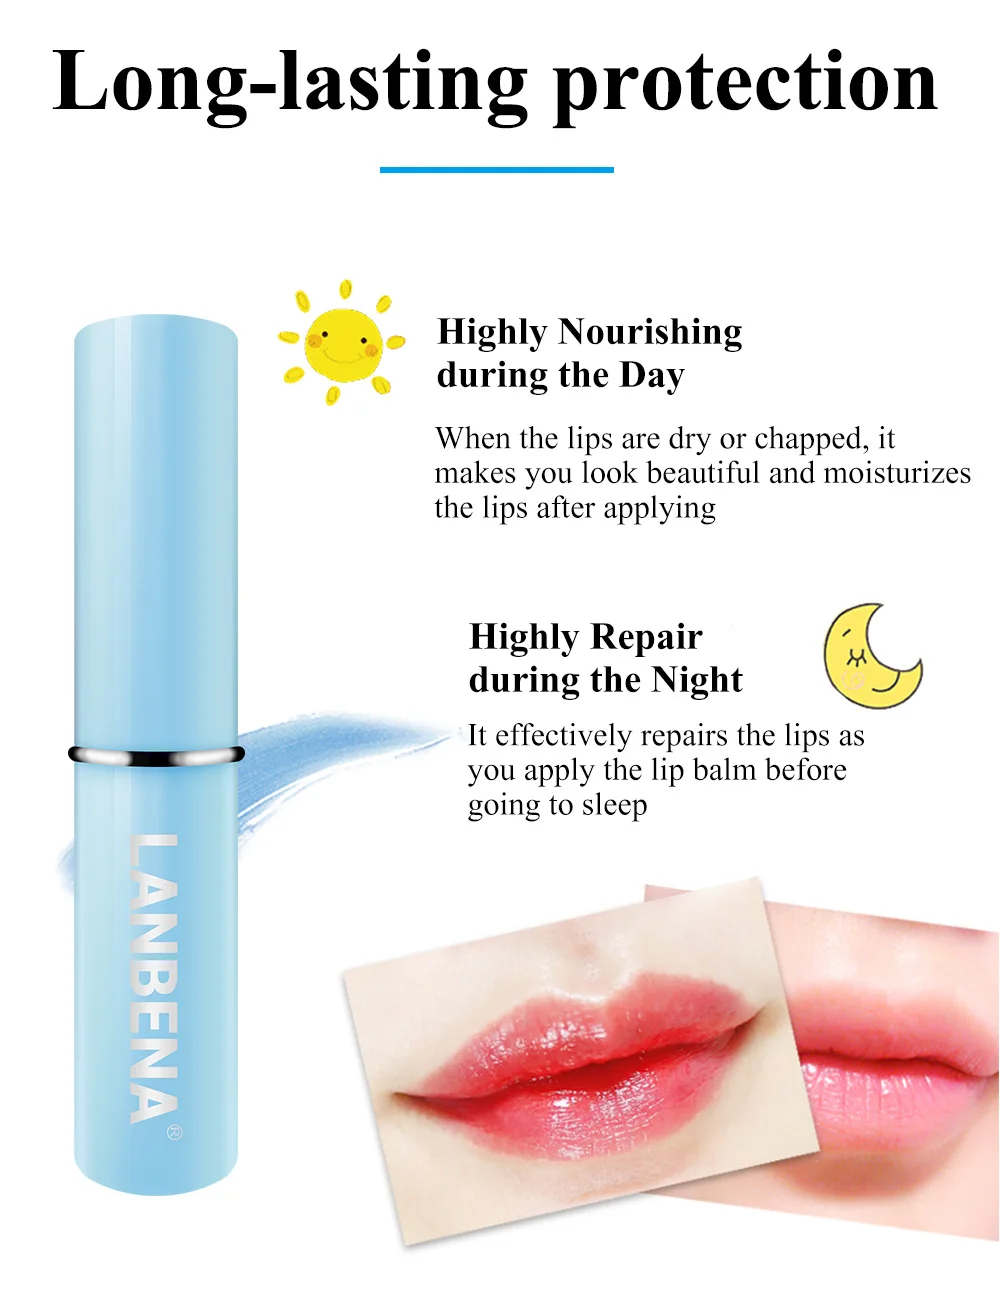 H5115f0e203a84cedaa2af94a0117f121B LANBENA Hyaluronic Acid Lasting Nourishing Lip Balm Moisturizing Reduces Fine Lines Relieves Dryness Repairs Damaged Lip Care